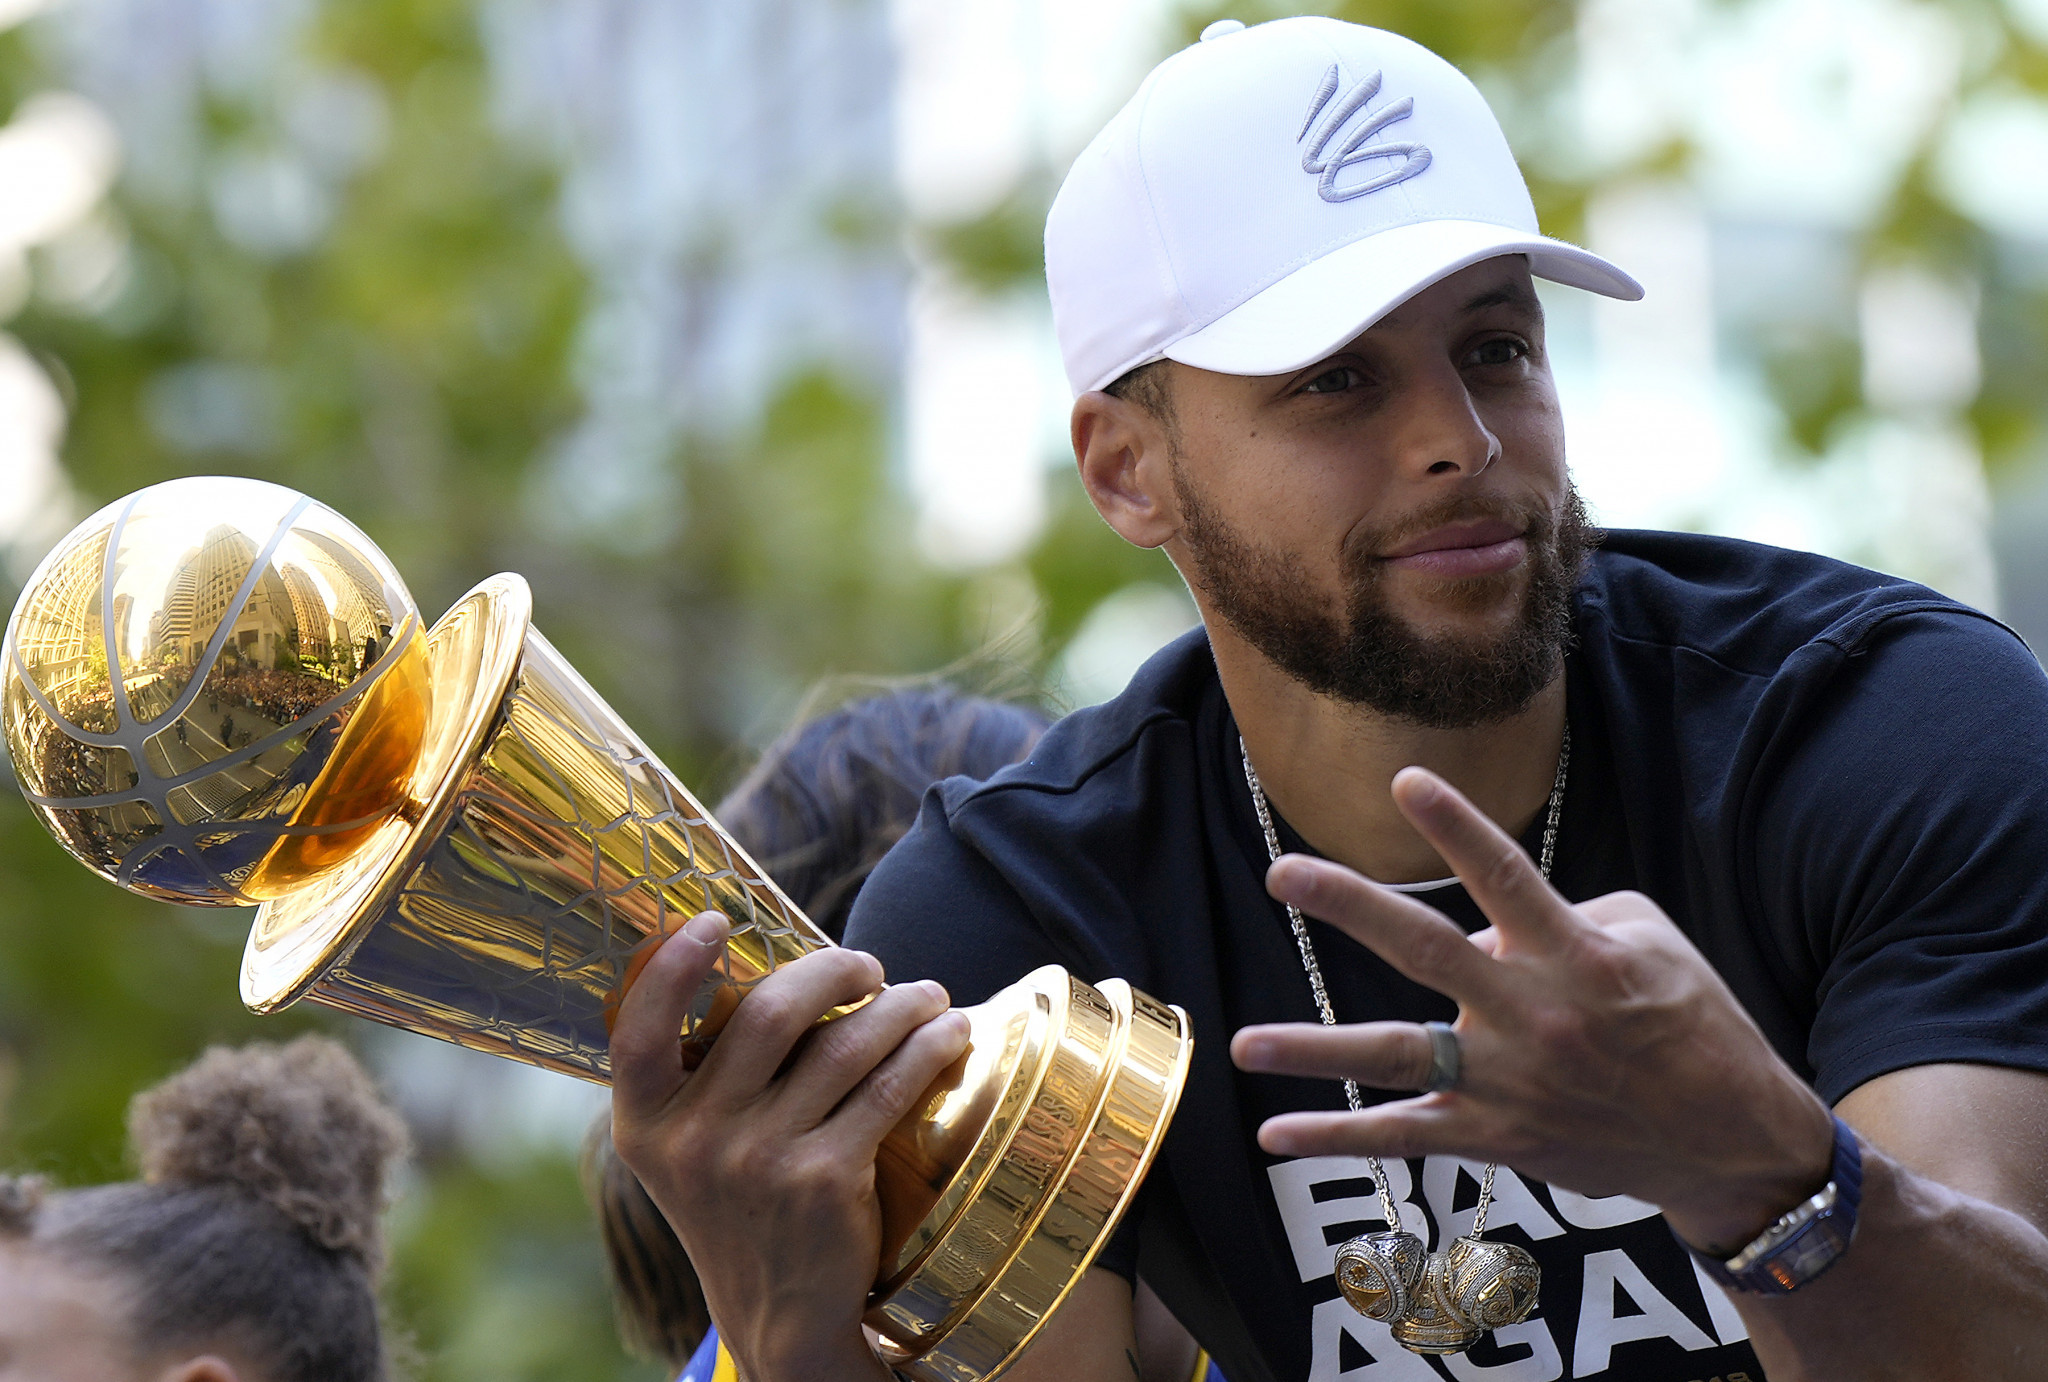 American Stephen Curry became a four-time NBA champion with the Golden State Warriors last year ©Getty Images